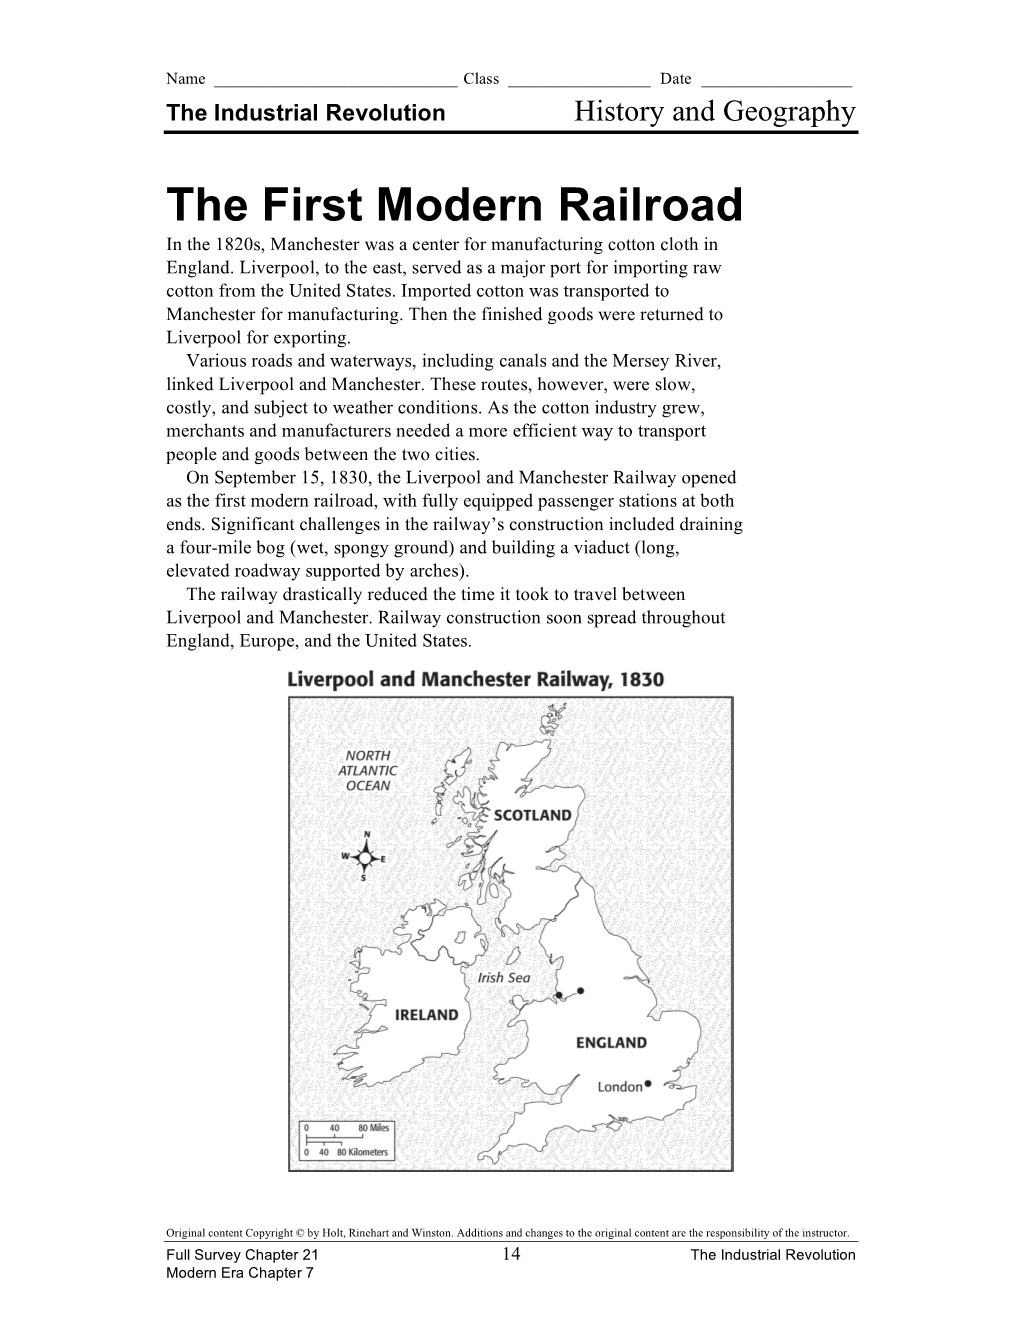 The First Modern Railroad in the 1820S, Manchester Was a Center for Manufacturing Cotton Cloth in England